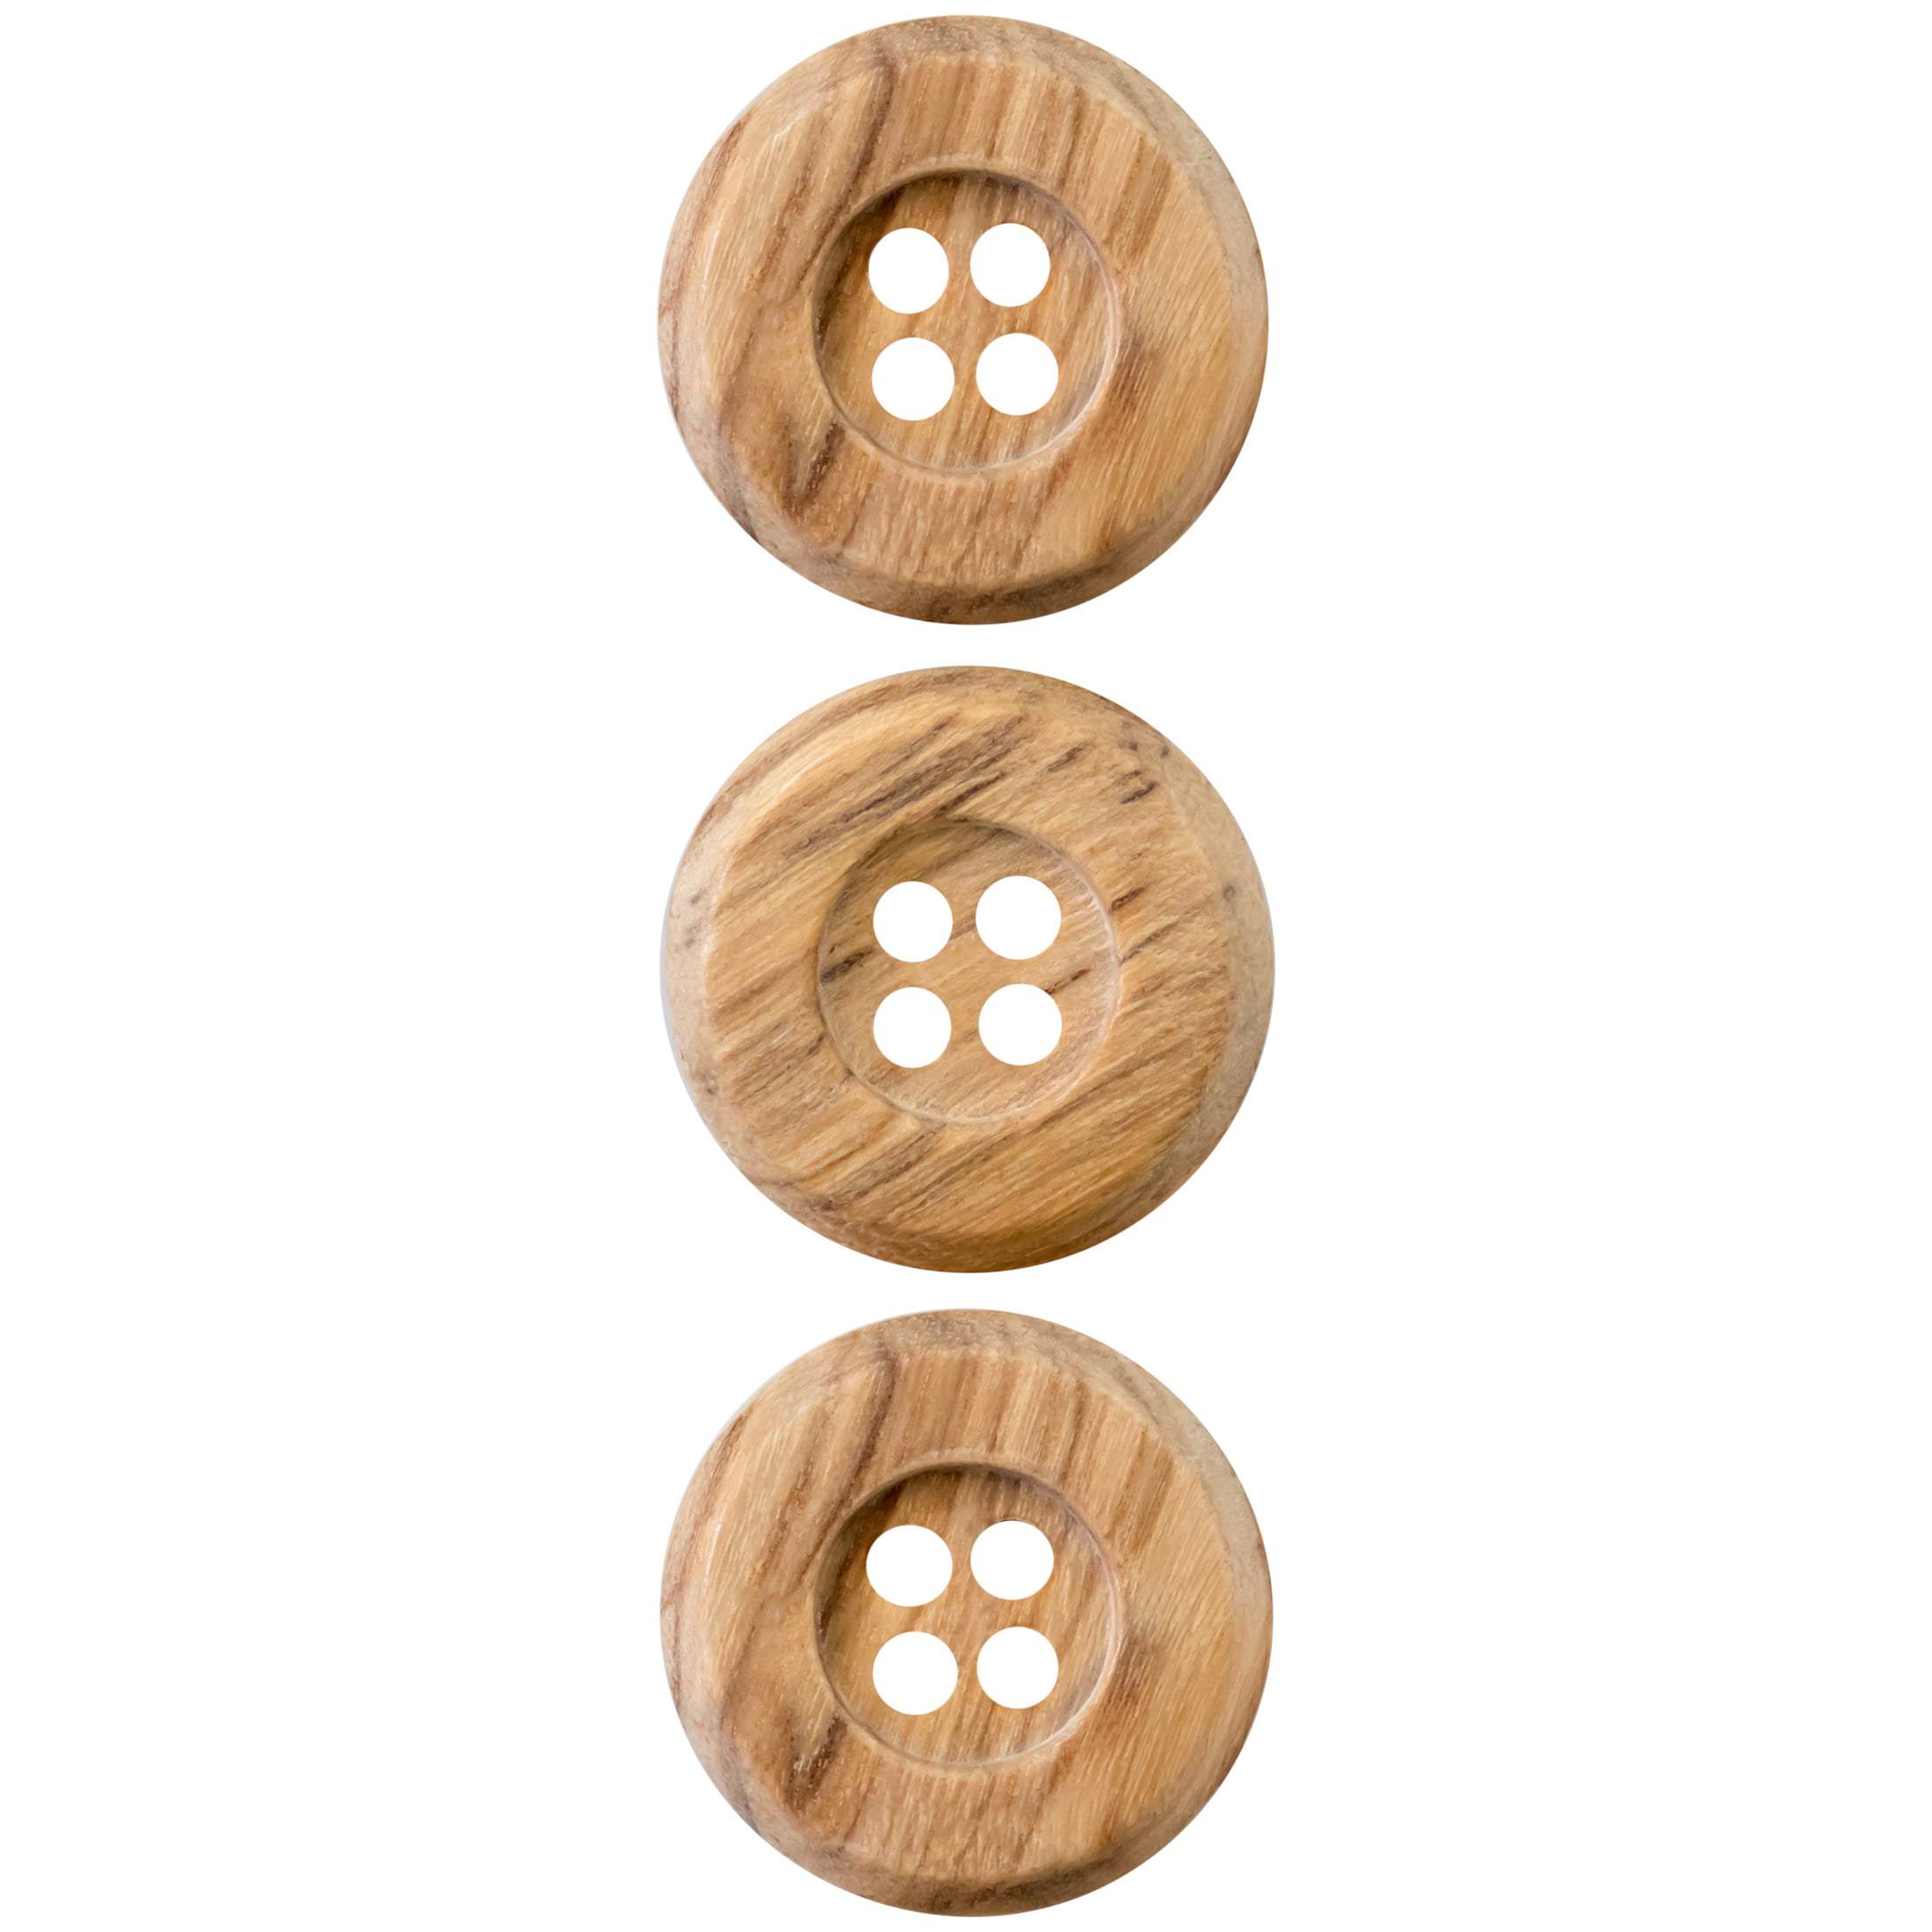 Durango Buttons Wood Stick Toggle Button - W35